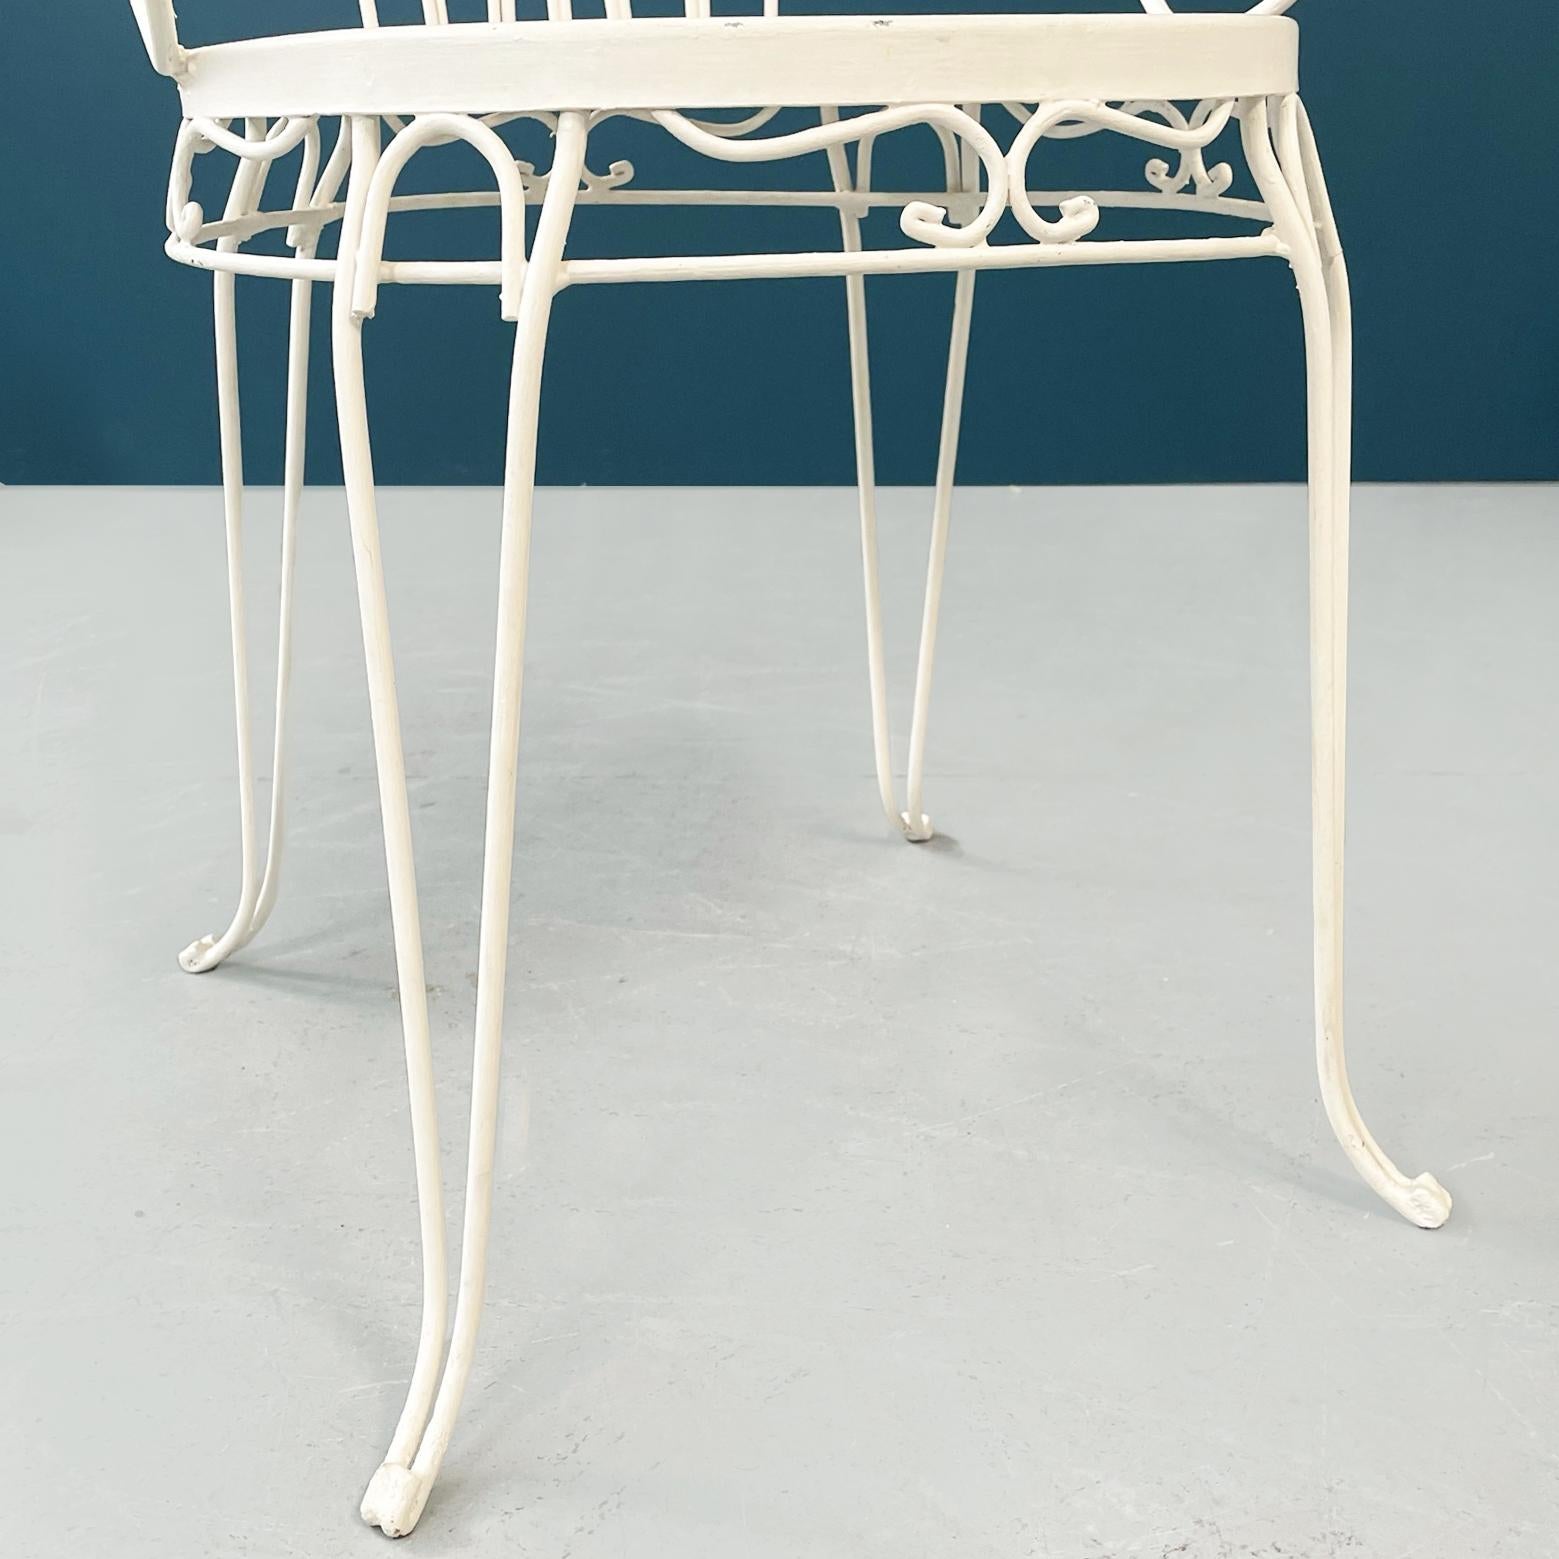 Italian Mid-Century Garden Chairs in White Wrought Iron with Curls, 1960s For Sale 8